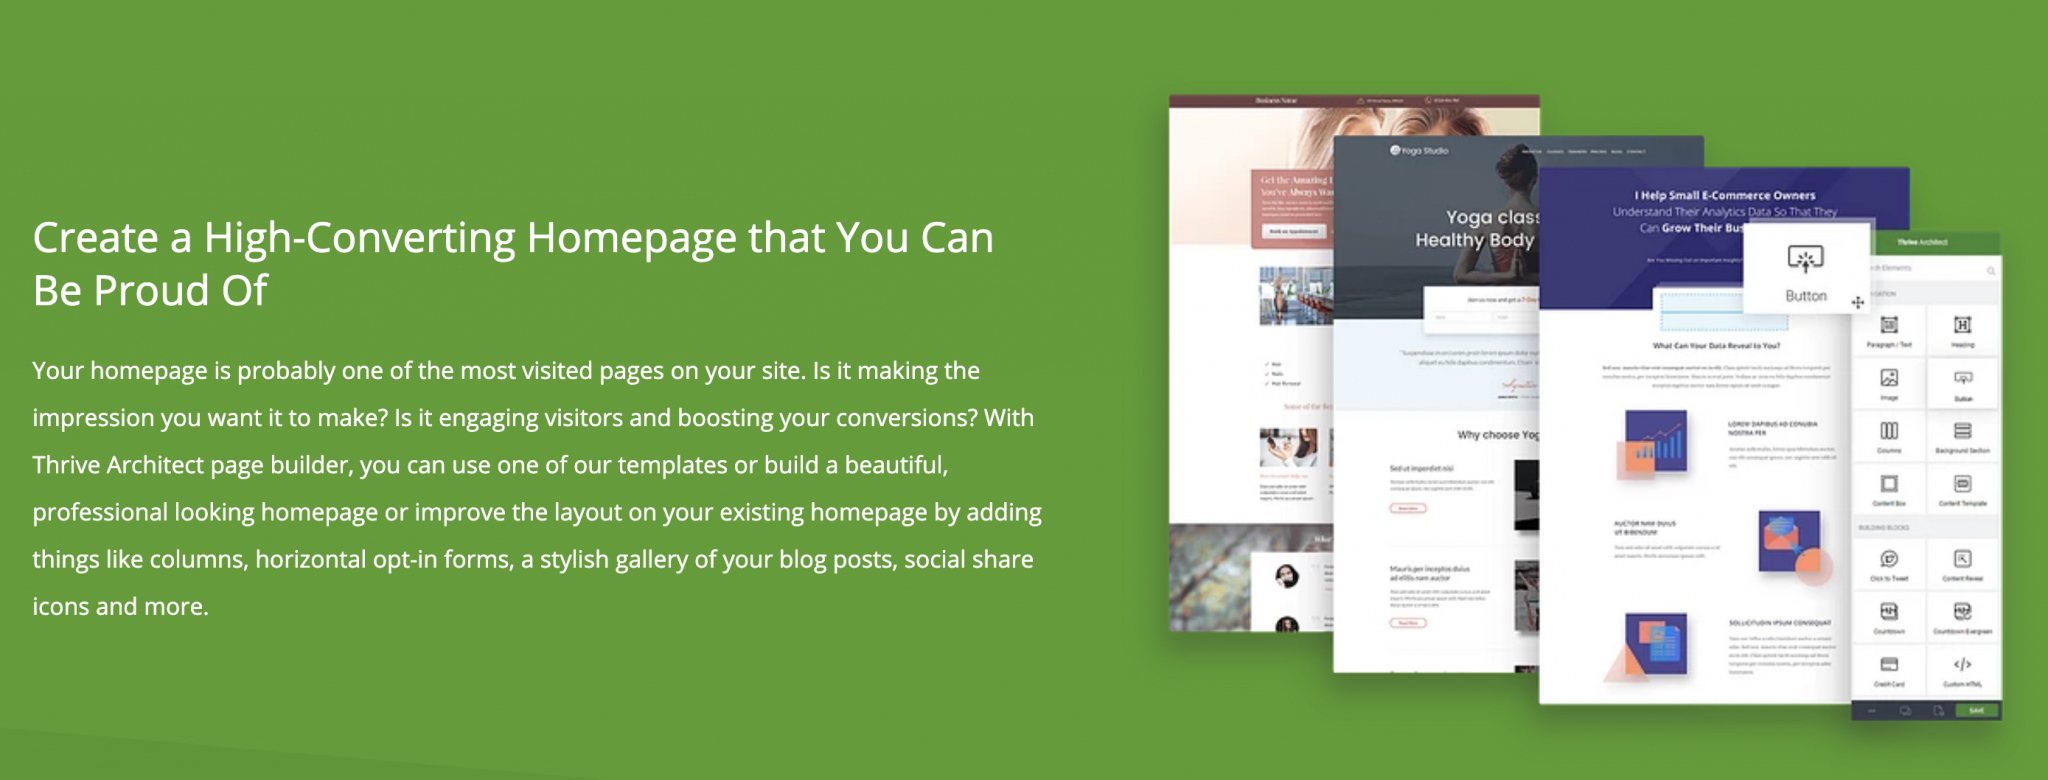 high-converting homepage creation thanks to Thrive Architect